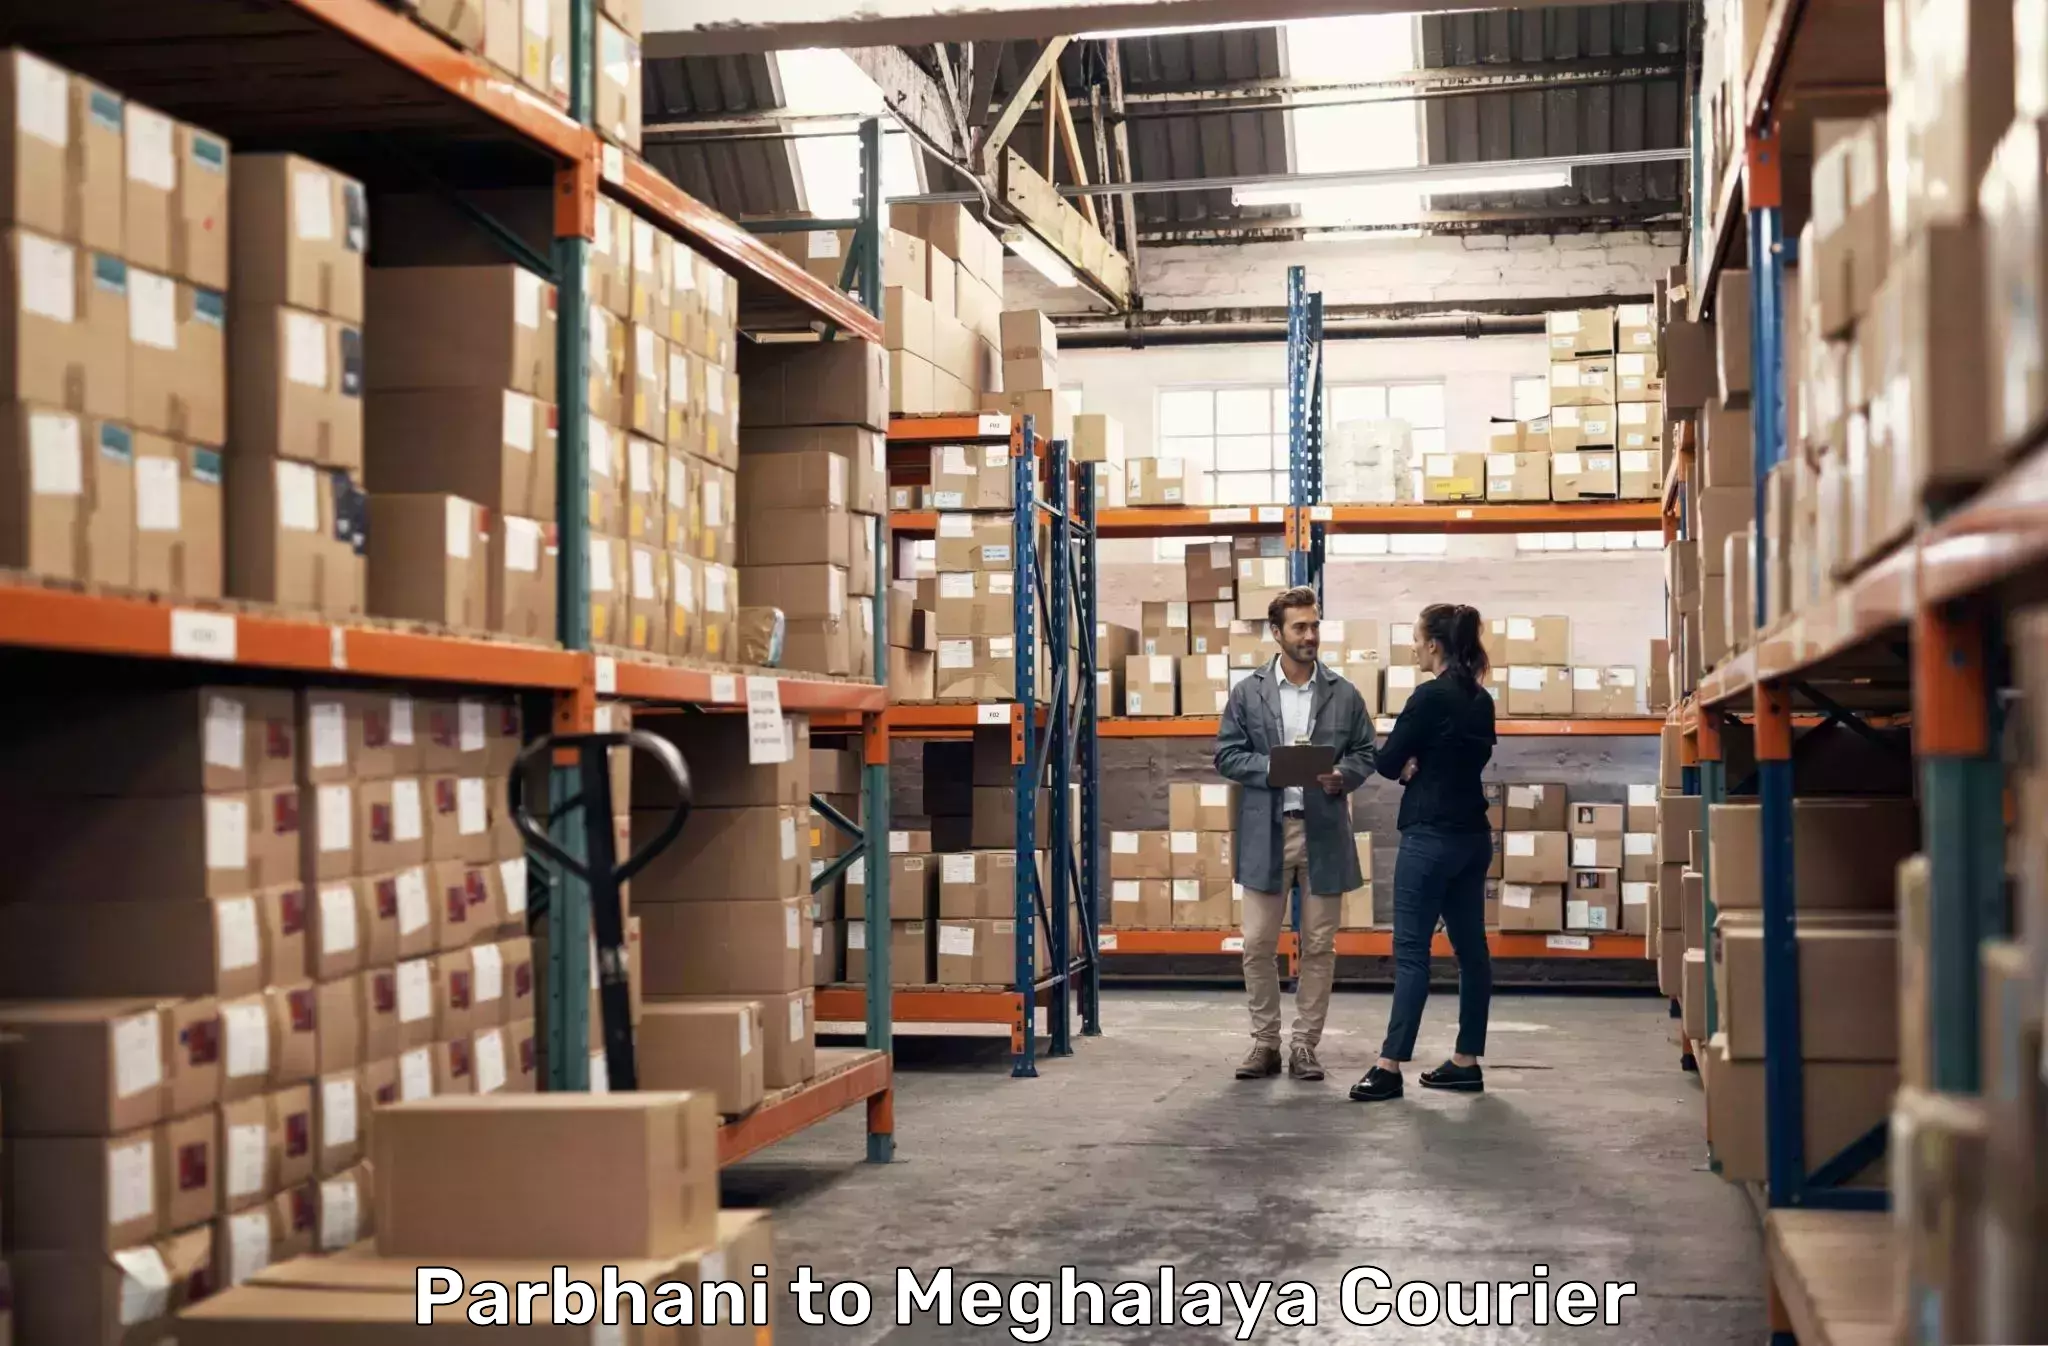 Subscription-based courier Parbhani to Umsaw